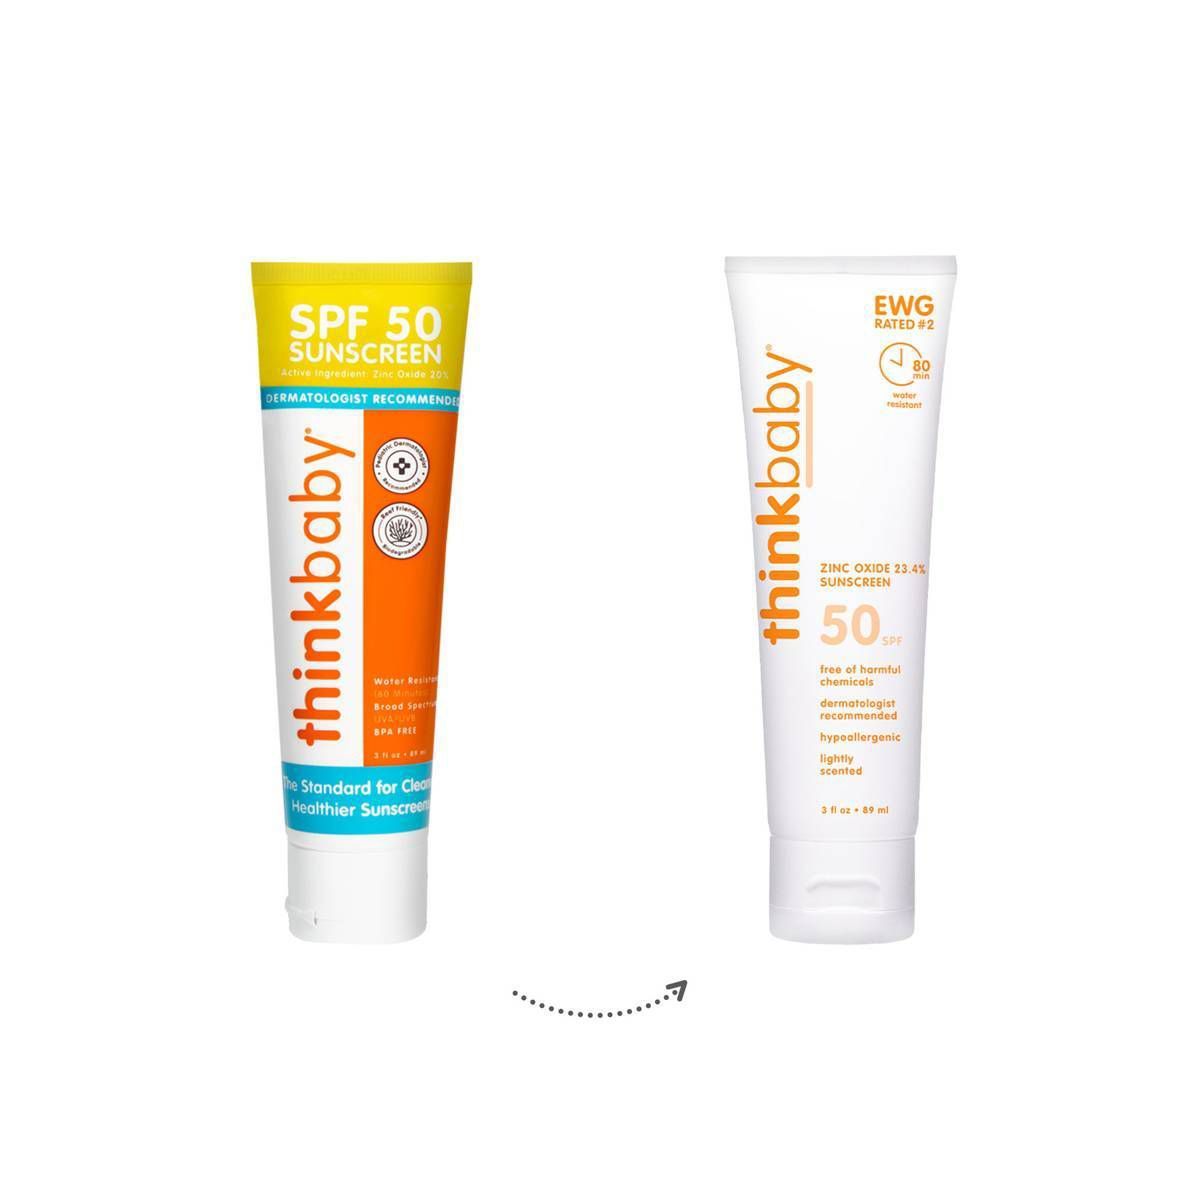 thinkbaby Mineral Sunscreen Lotion SPF 50 - 3 fl oz | Target